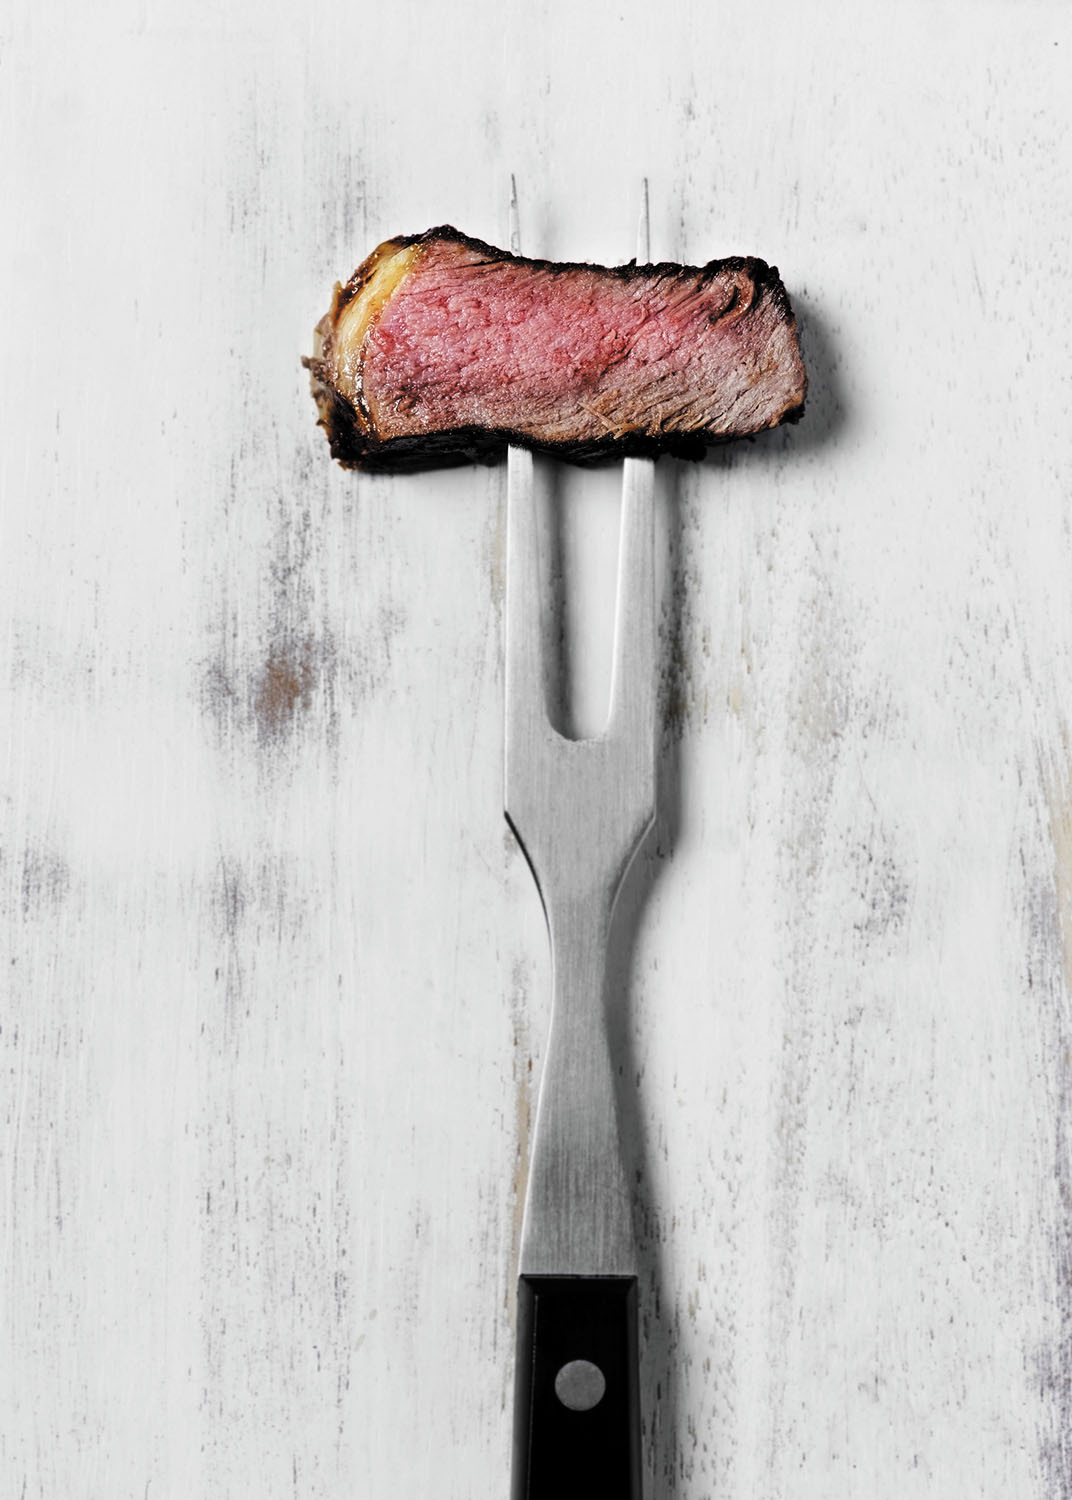 photo of a piece of cooked meat on a two-prong grill fork